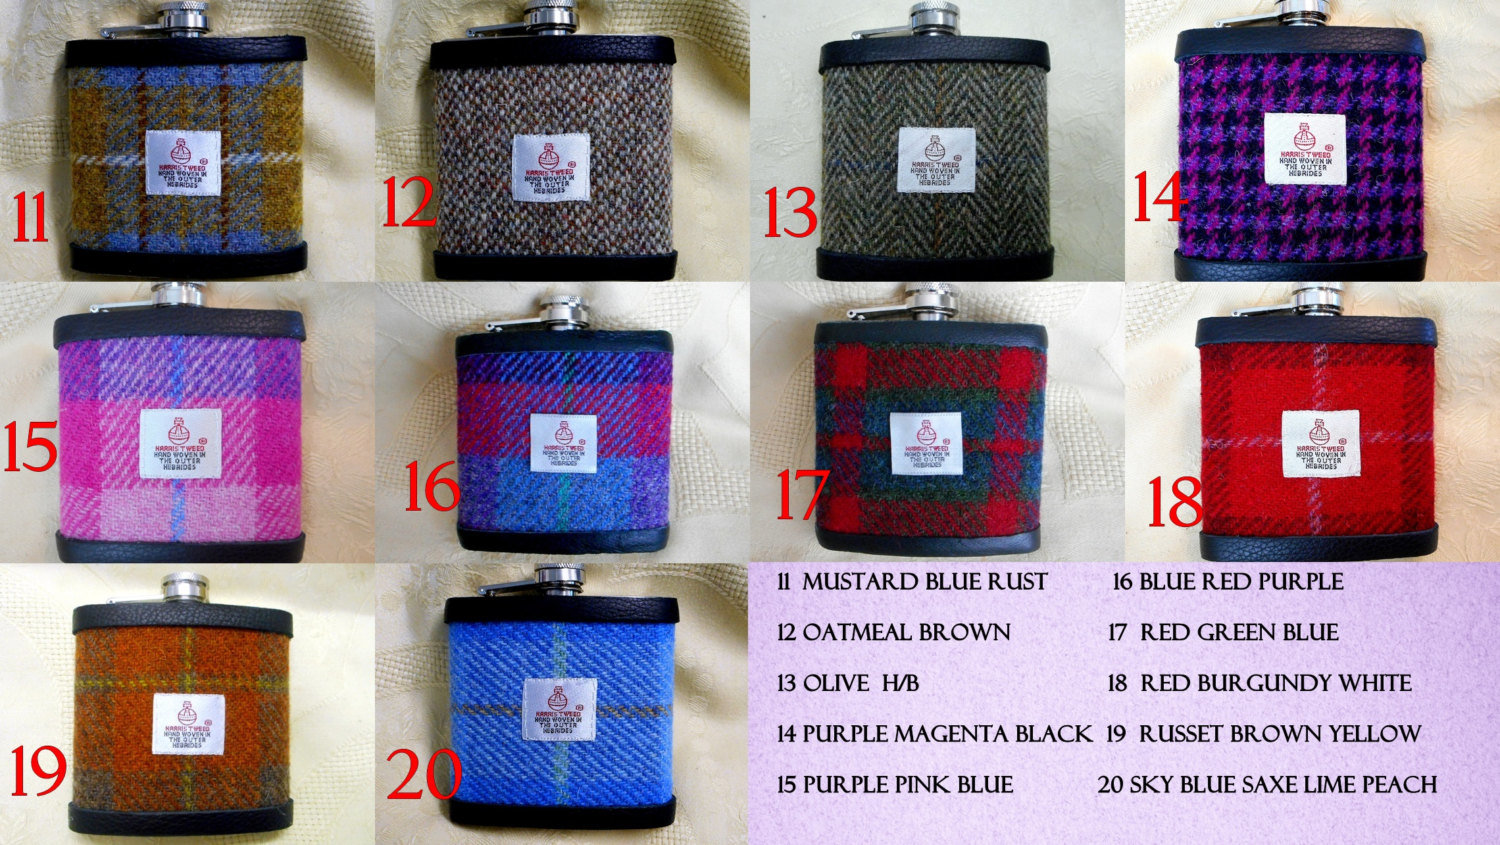 Gift for Dad Harris Tweed hip flask , Scottish luxury gift for retirement, birthday or Christmas  in choice of any tweed with real leather label